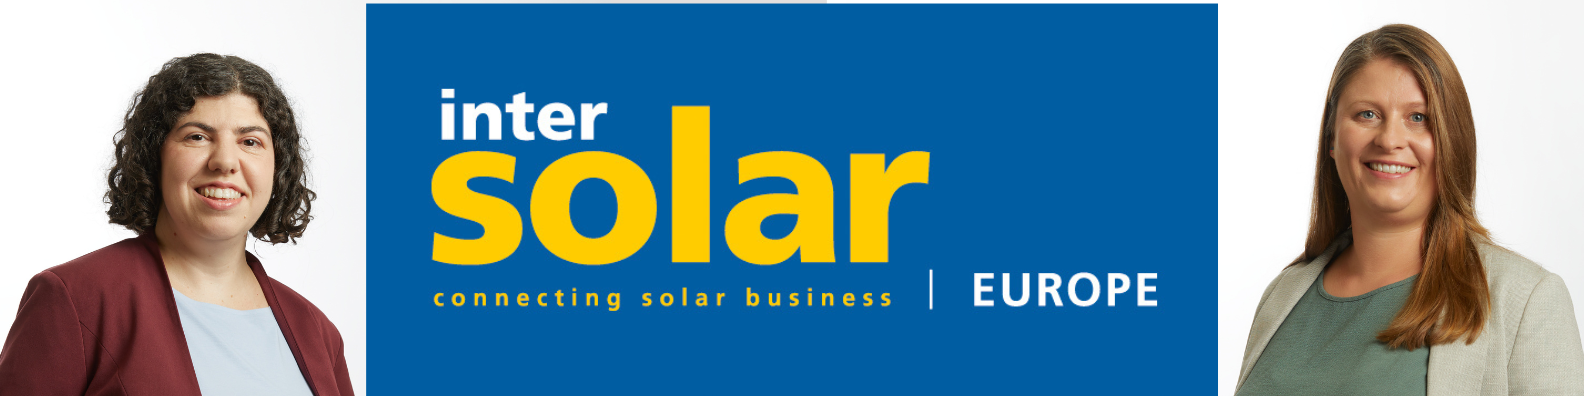 Intersolar Europe – The Leading Exhibition for the Solar Industry